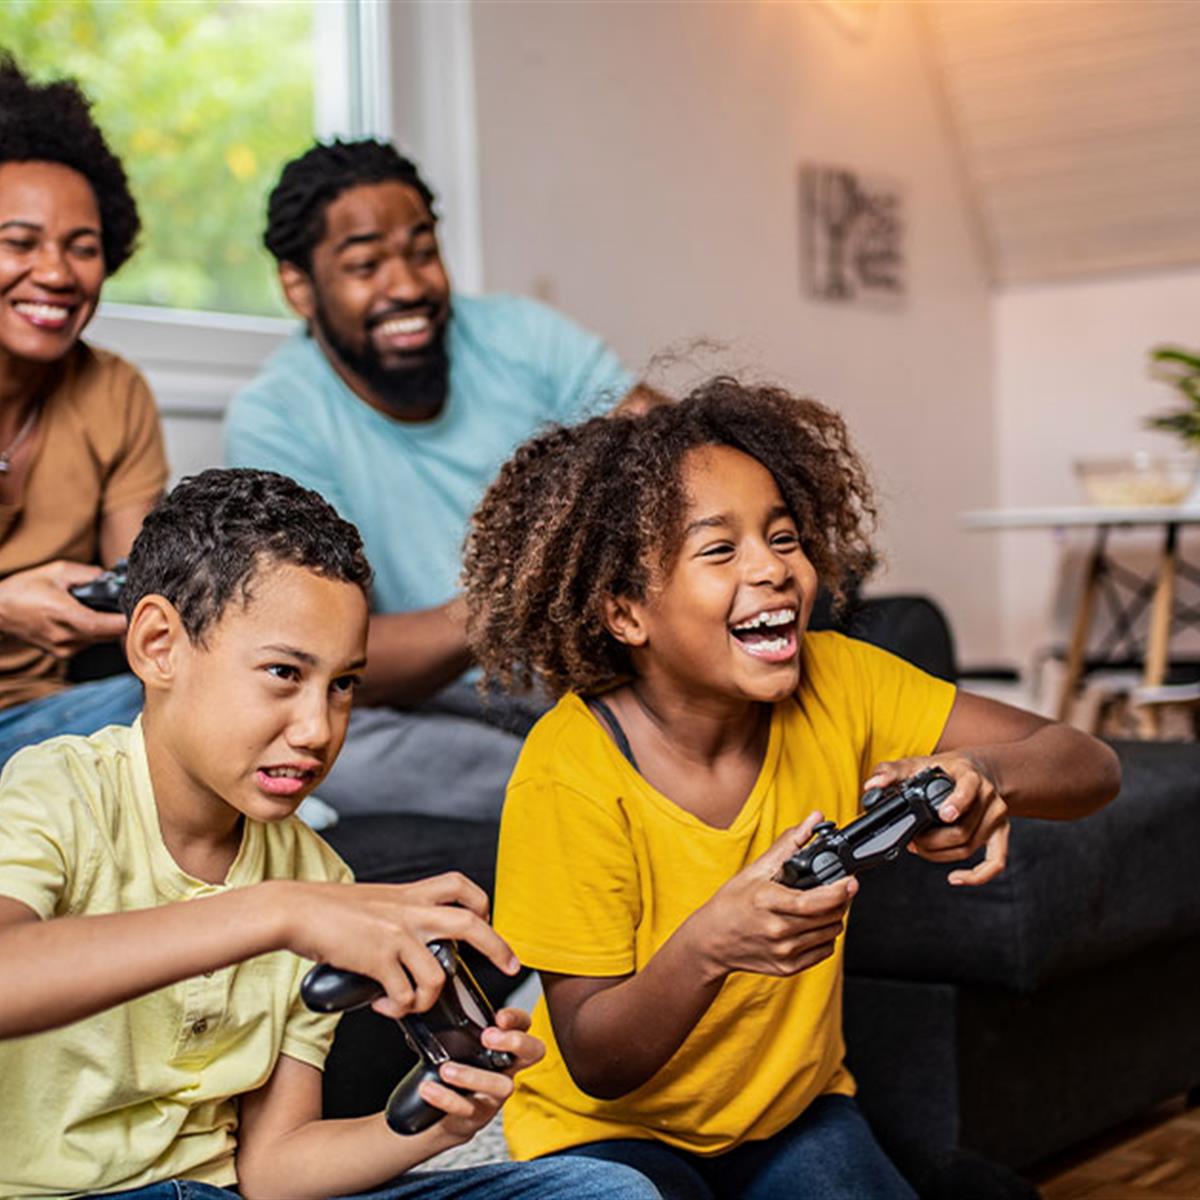 Family Playing Video Games Together At Home2 ?RenditionID=6